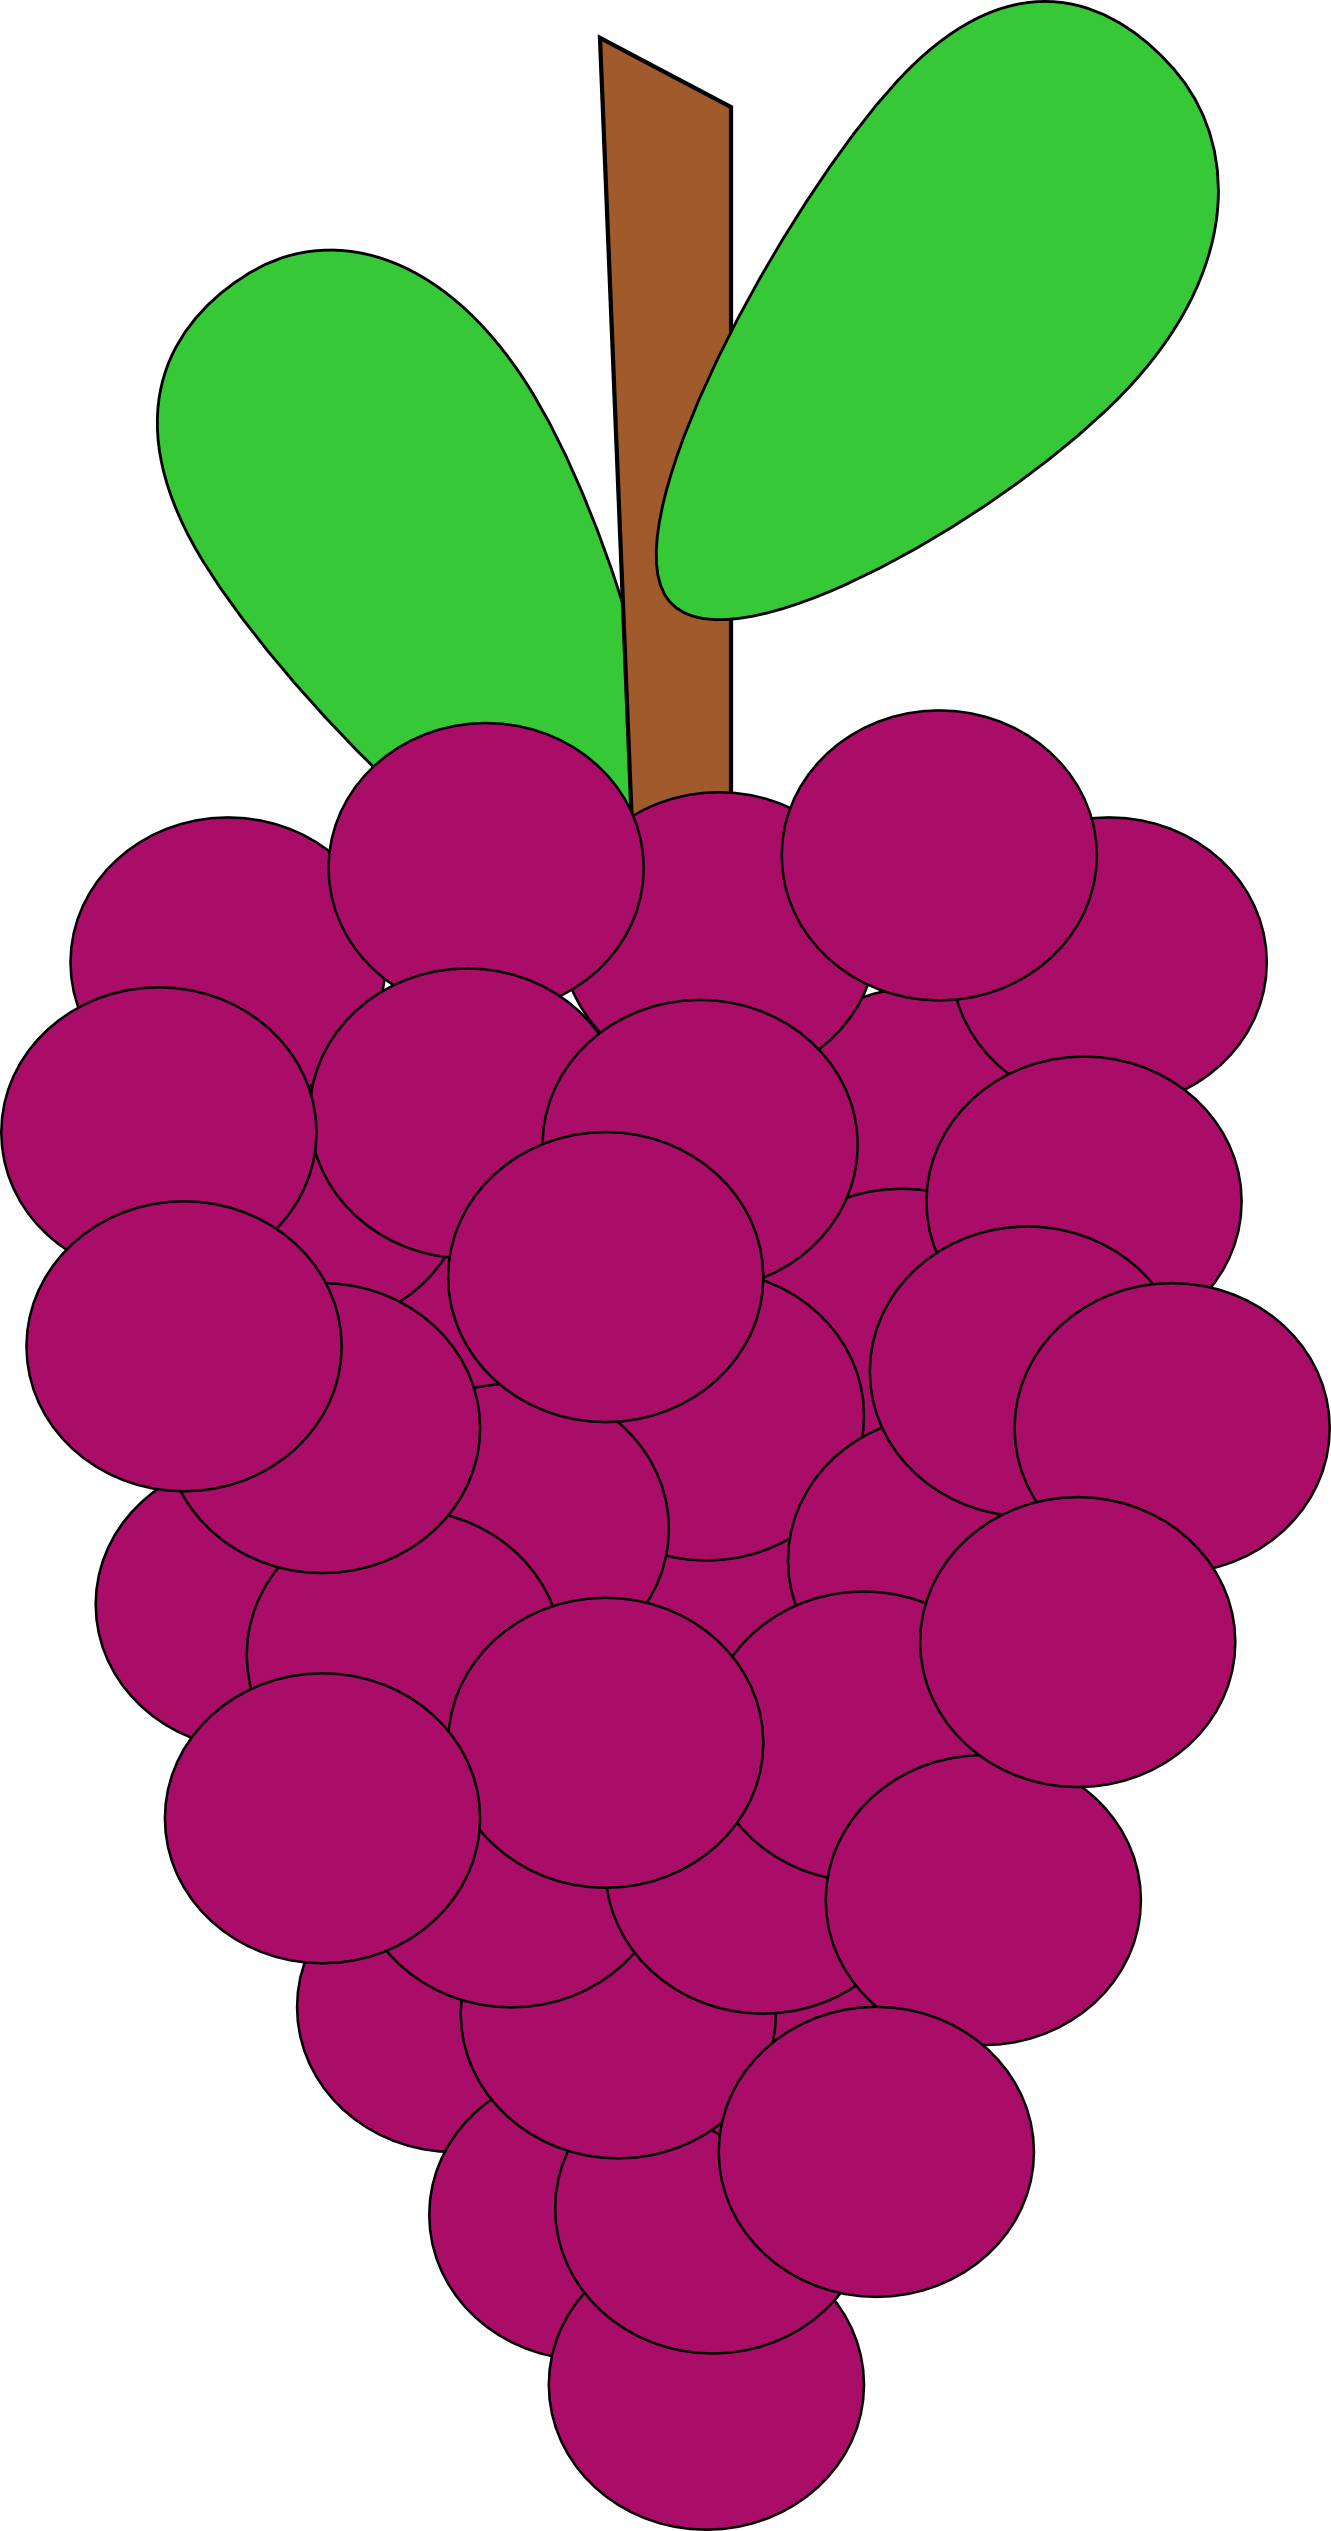 clipart of grapes - photo #31